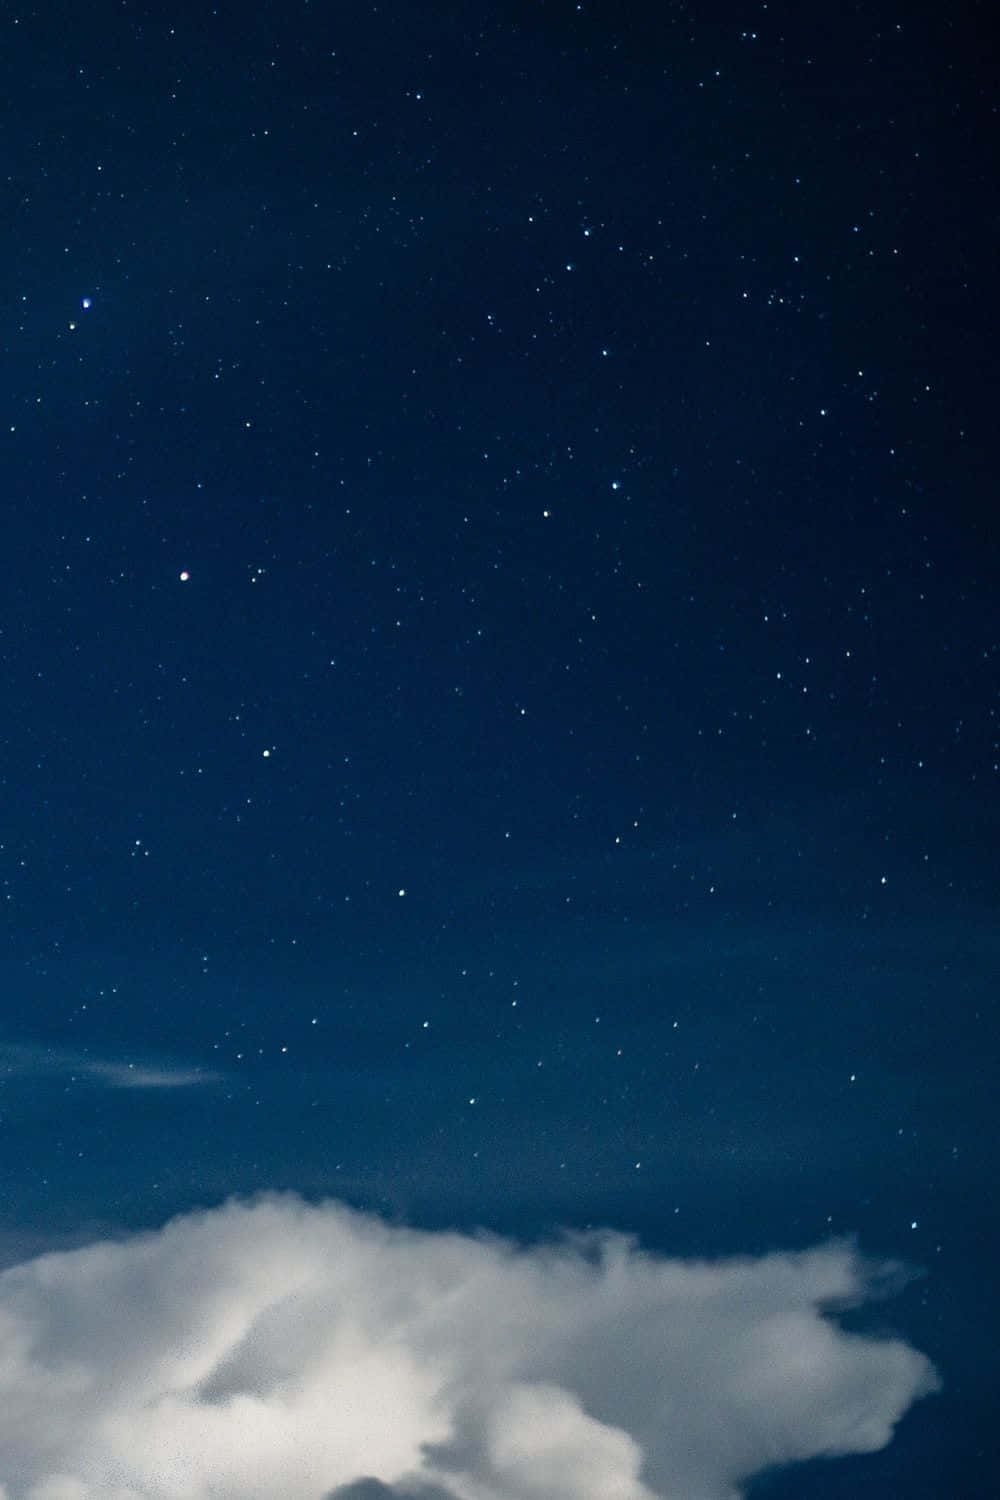 Stunning View of the Moon and Stars from your Phone Wallpaper